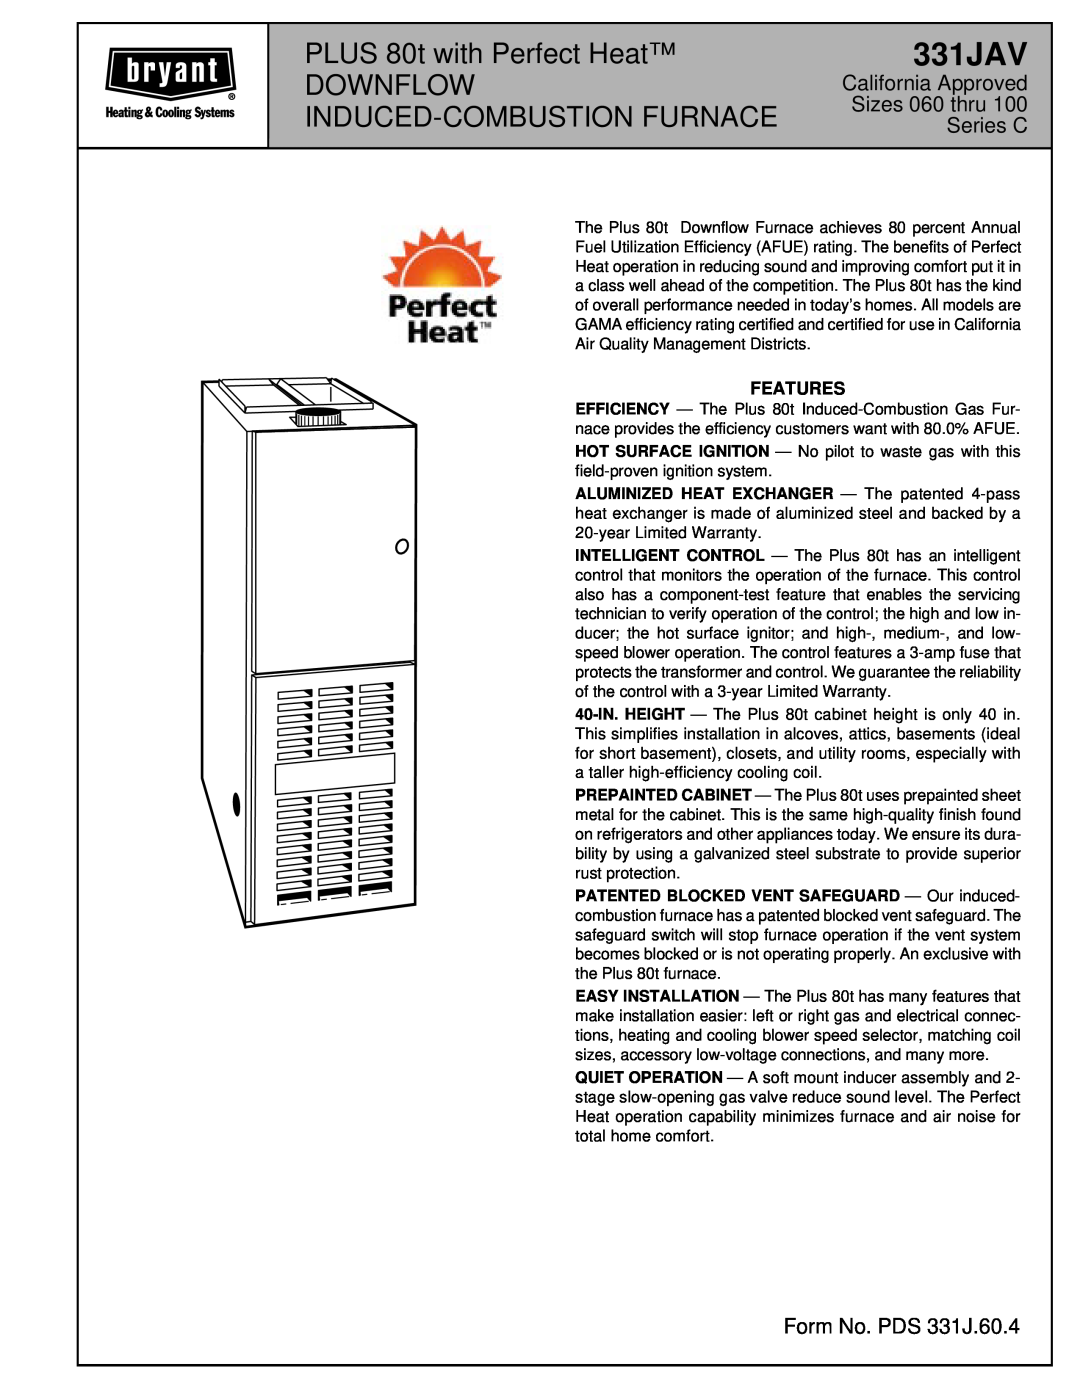 Bryant 331JAV warranty Features, PLUS 80t with Perfect Heat, Downflow, Induced-Combustionfurnace, California Approved 